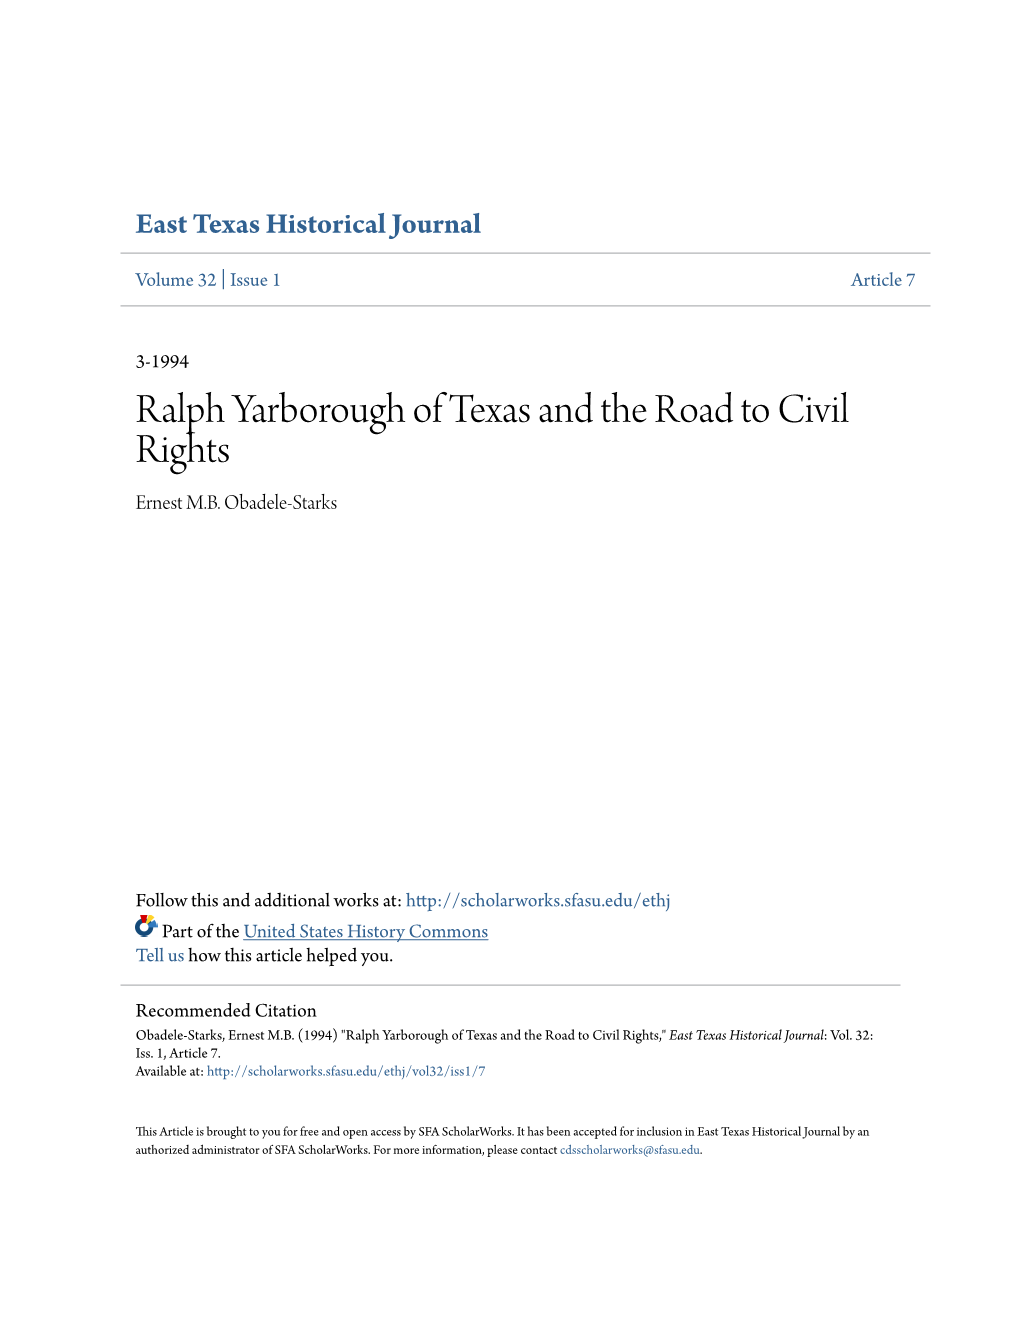 Ralph Yarborough of Texas and the Road to Civil Rights Ernest M.B